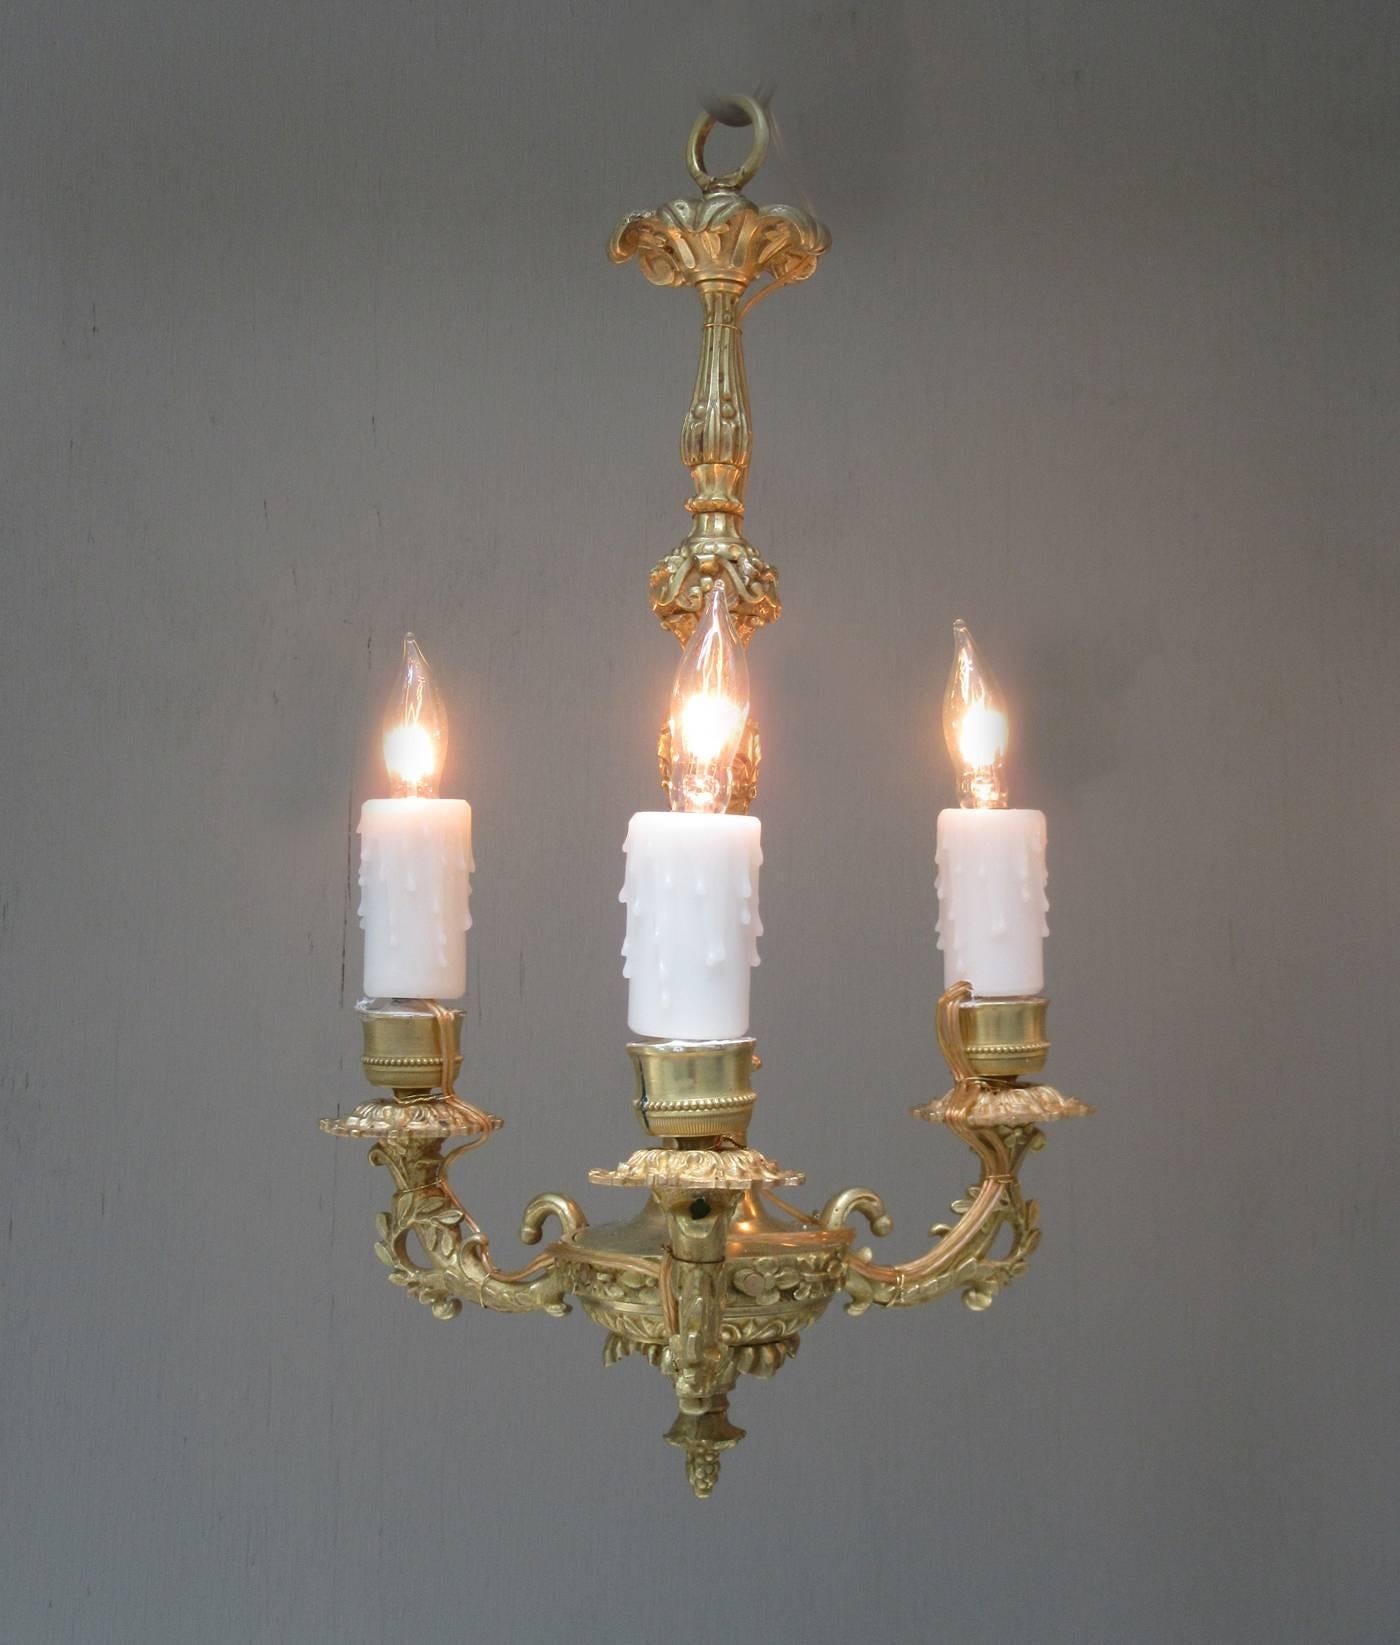 Diminutive Pair of 19th Century French Louis XIV Bronze Doré Chandeliers In Good Condition For Sale In Charleston, SC